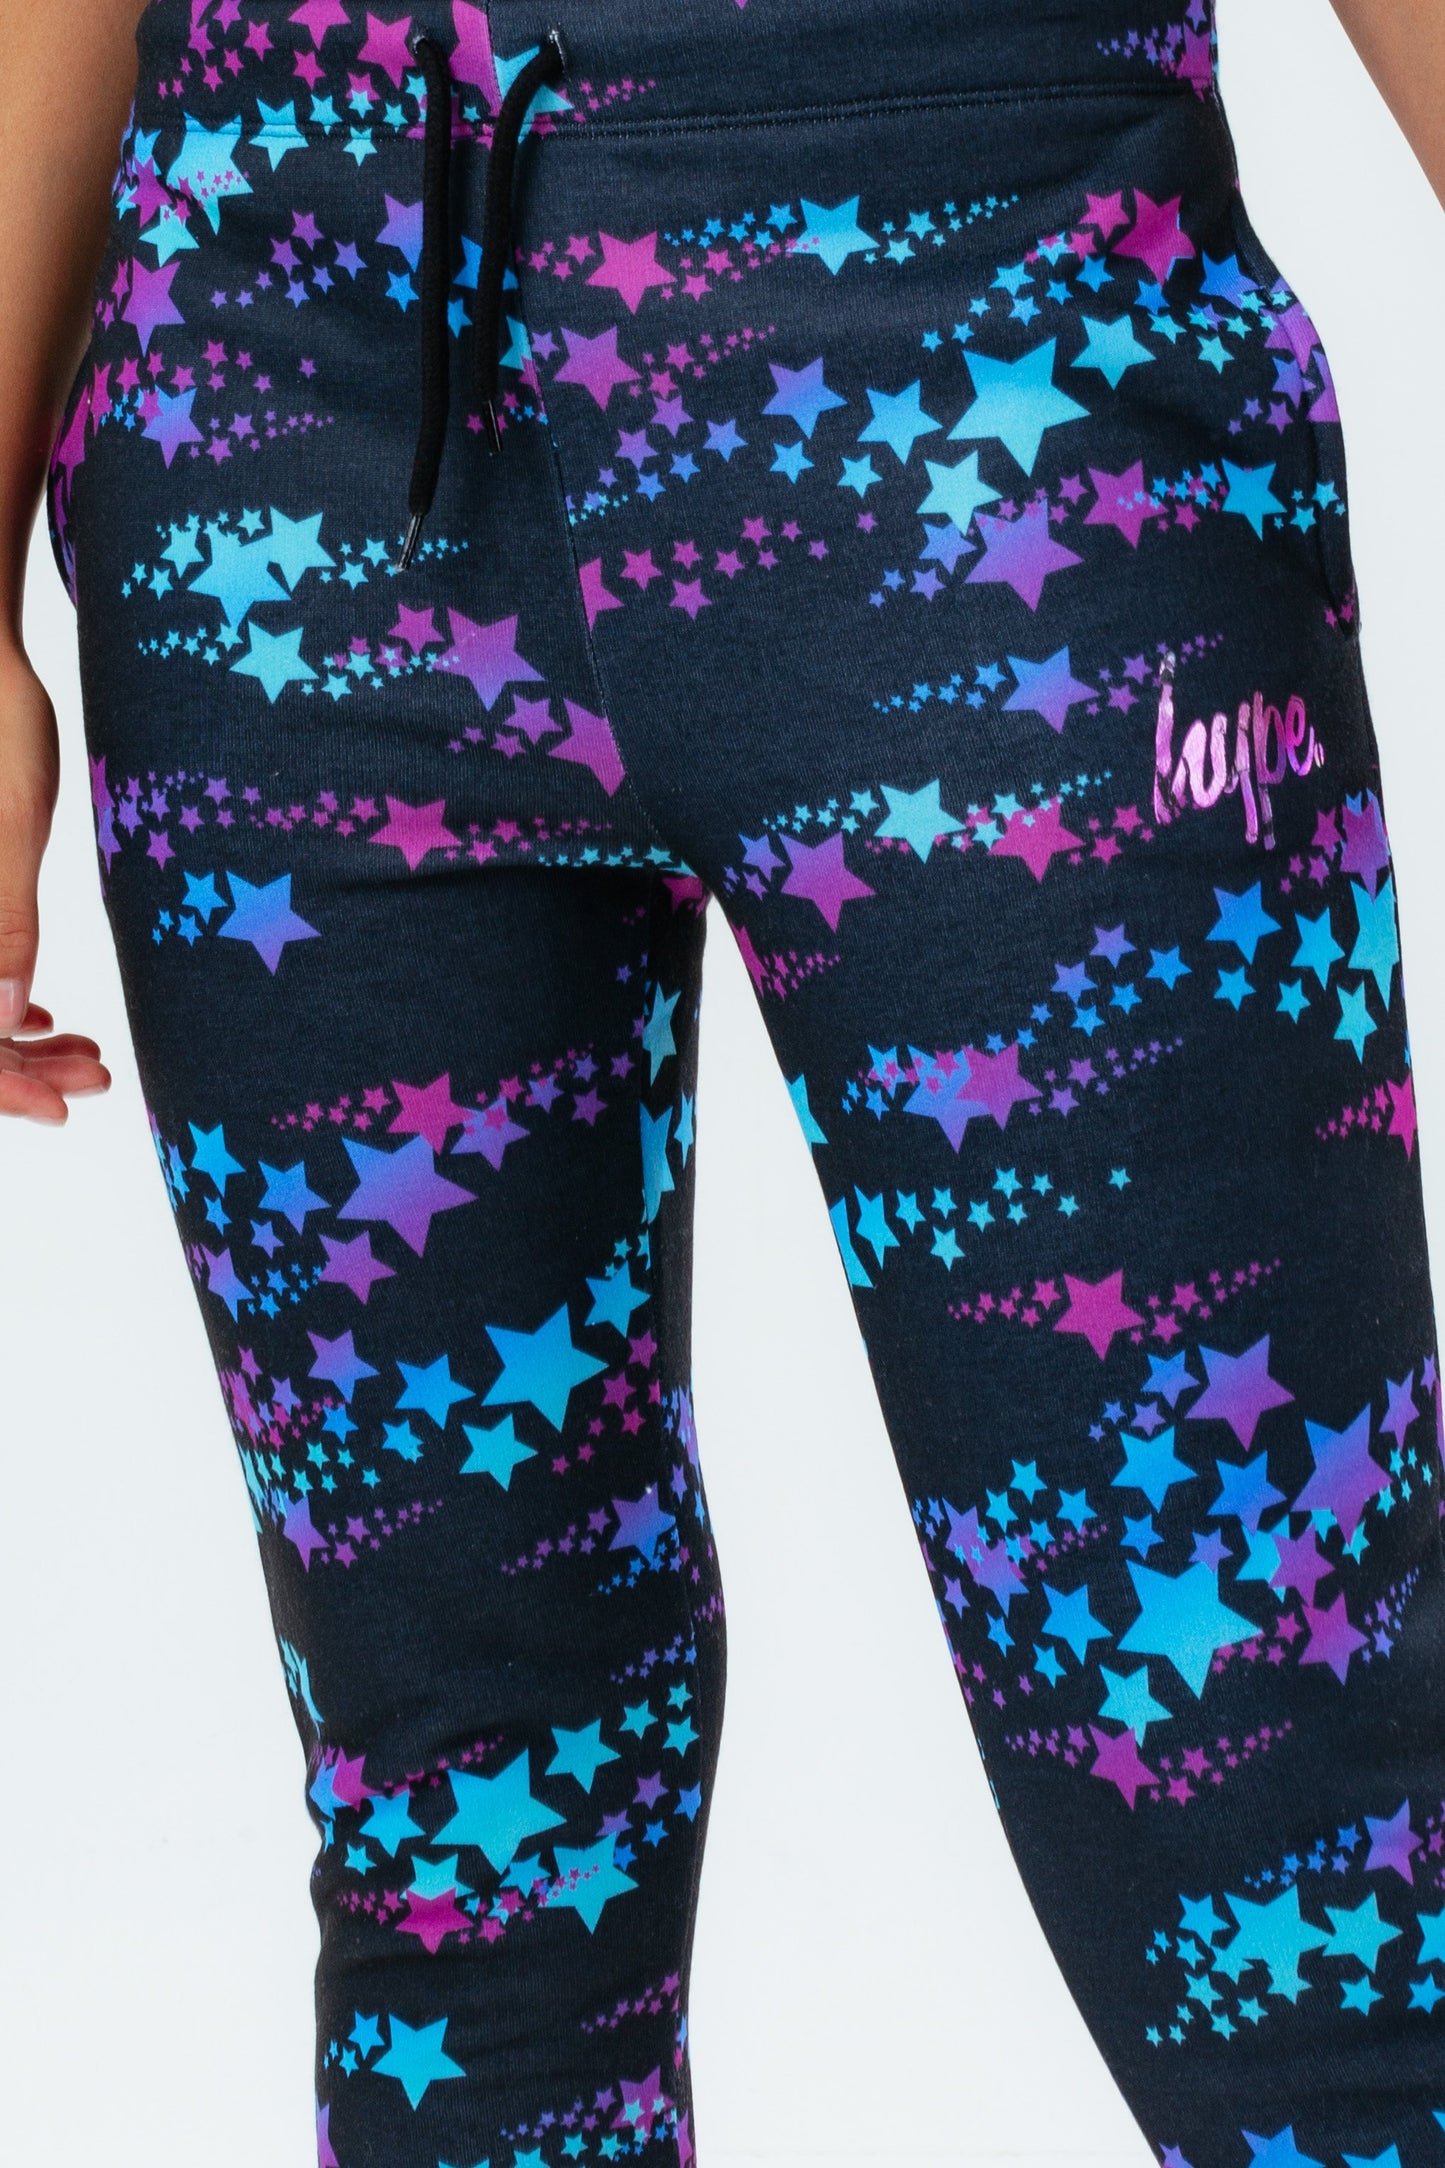 HYPE STAR FADE GIRLS JOGGERS